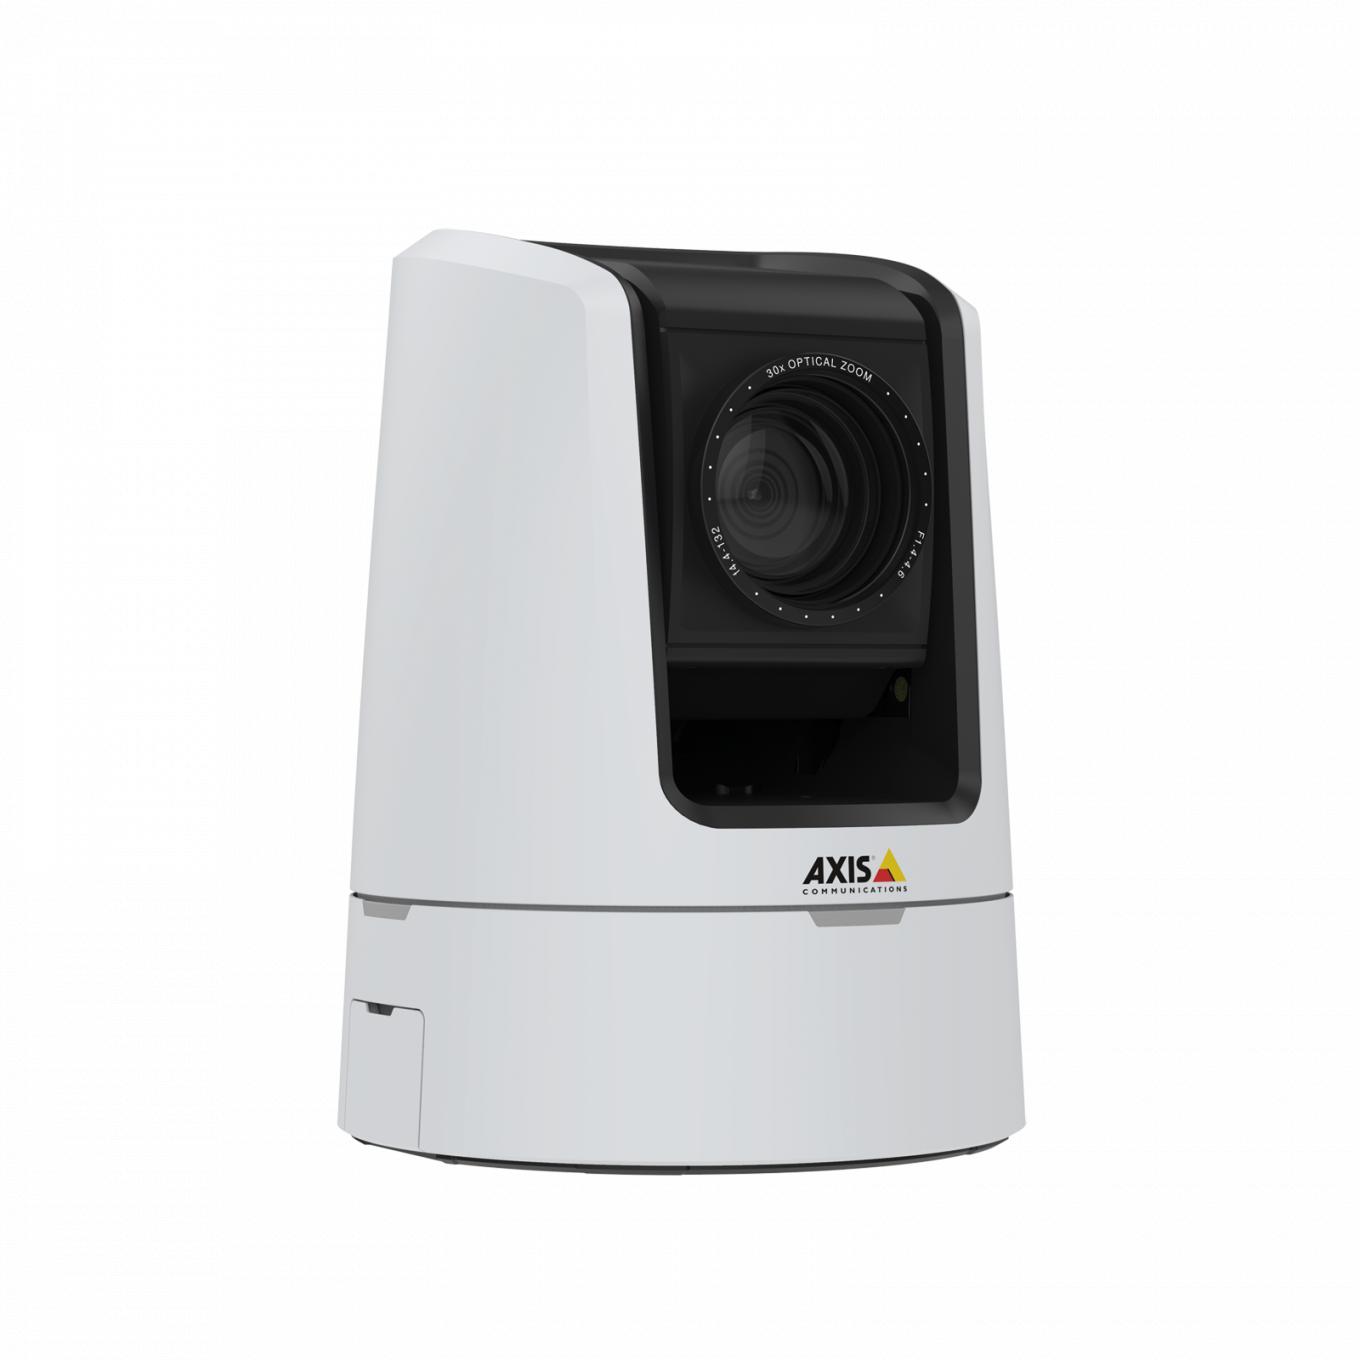 AXIS V5925 PTZ Network Camera offers broadcast-quality HDTV 1080p.